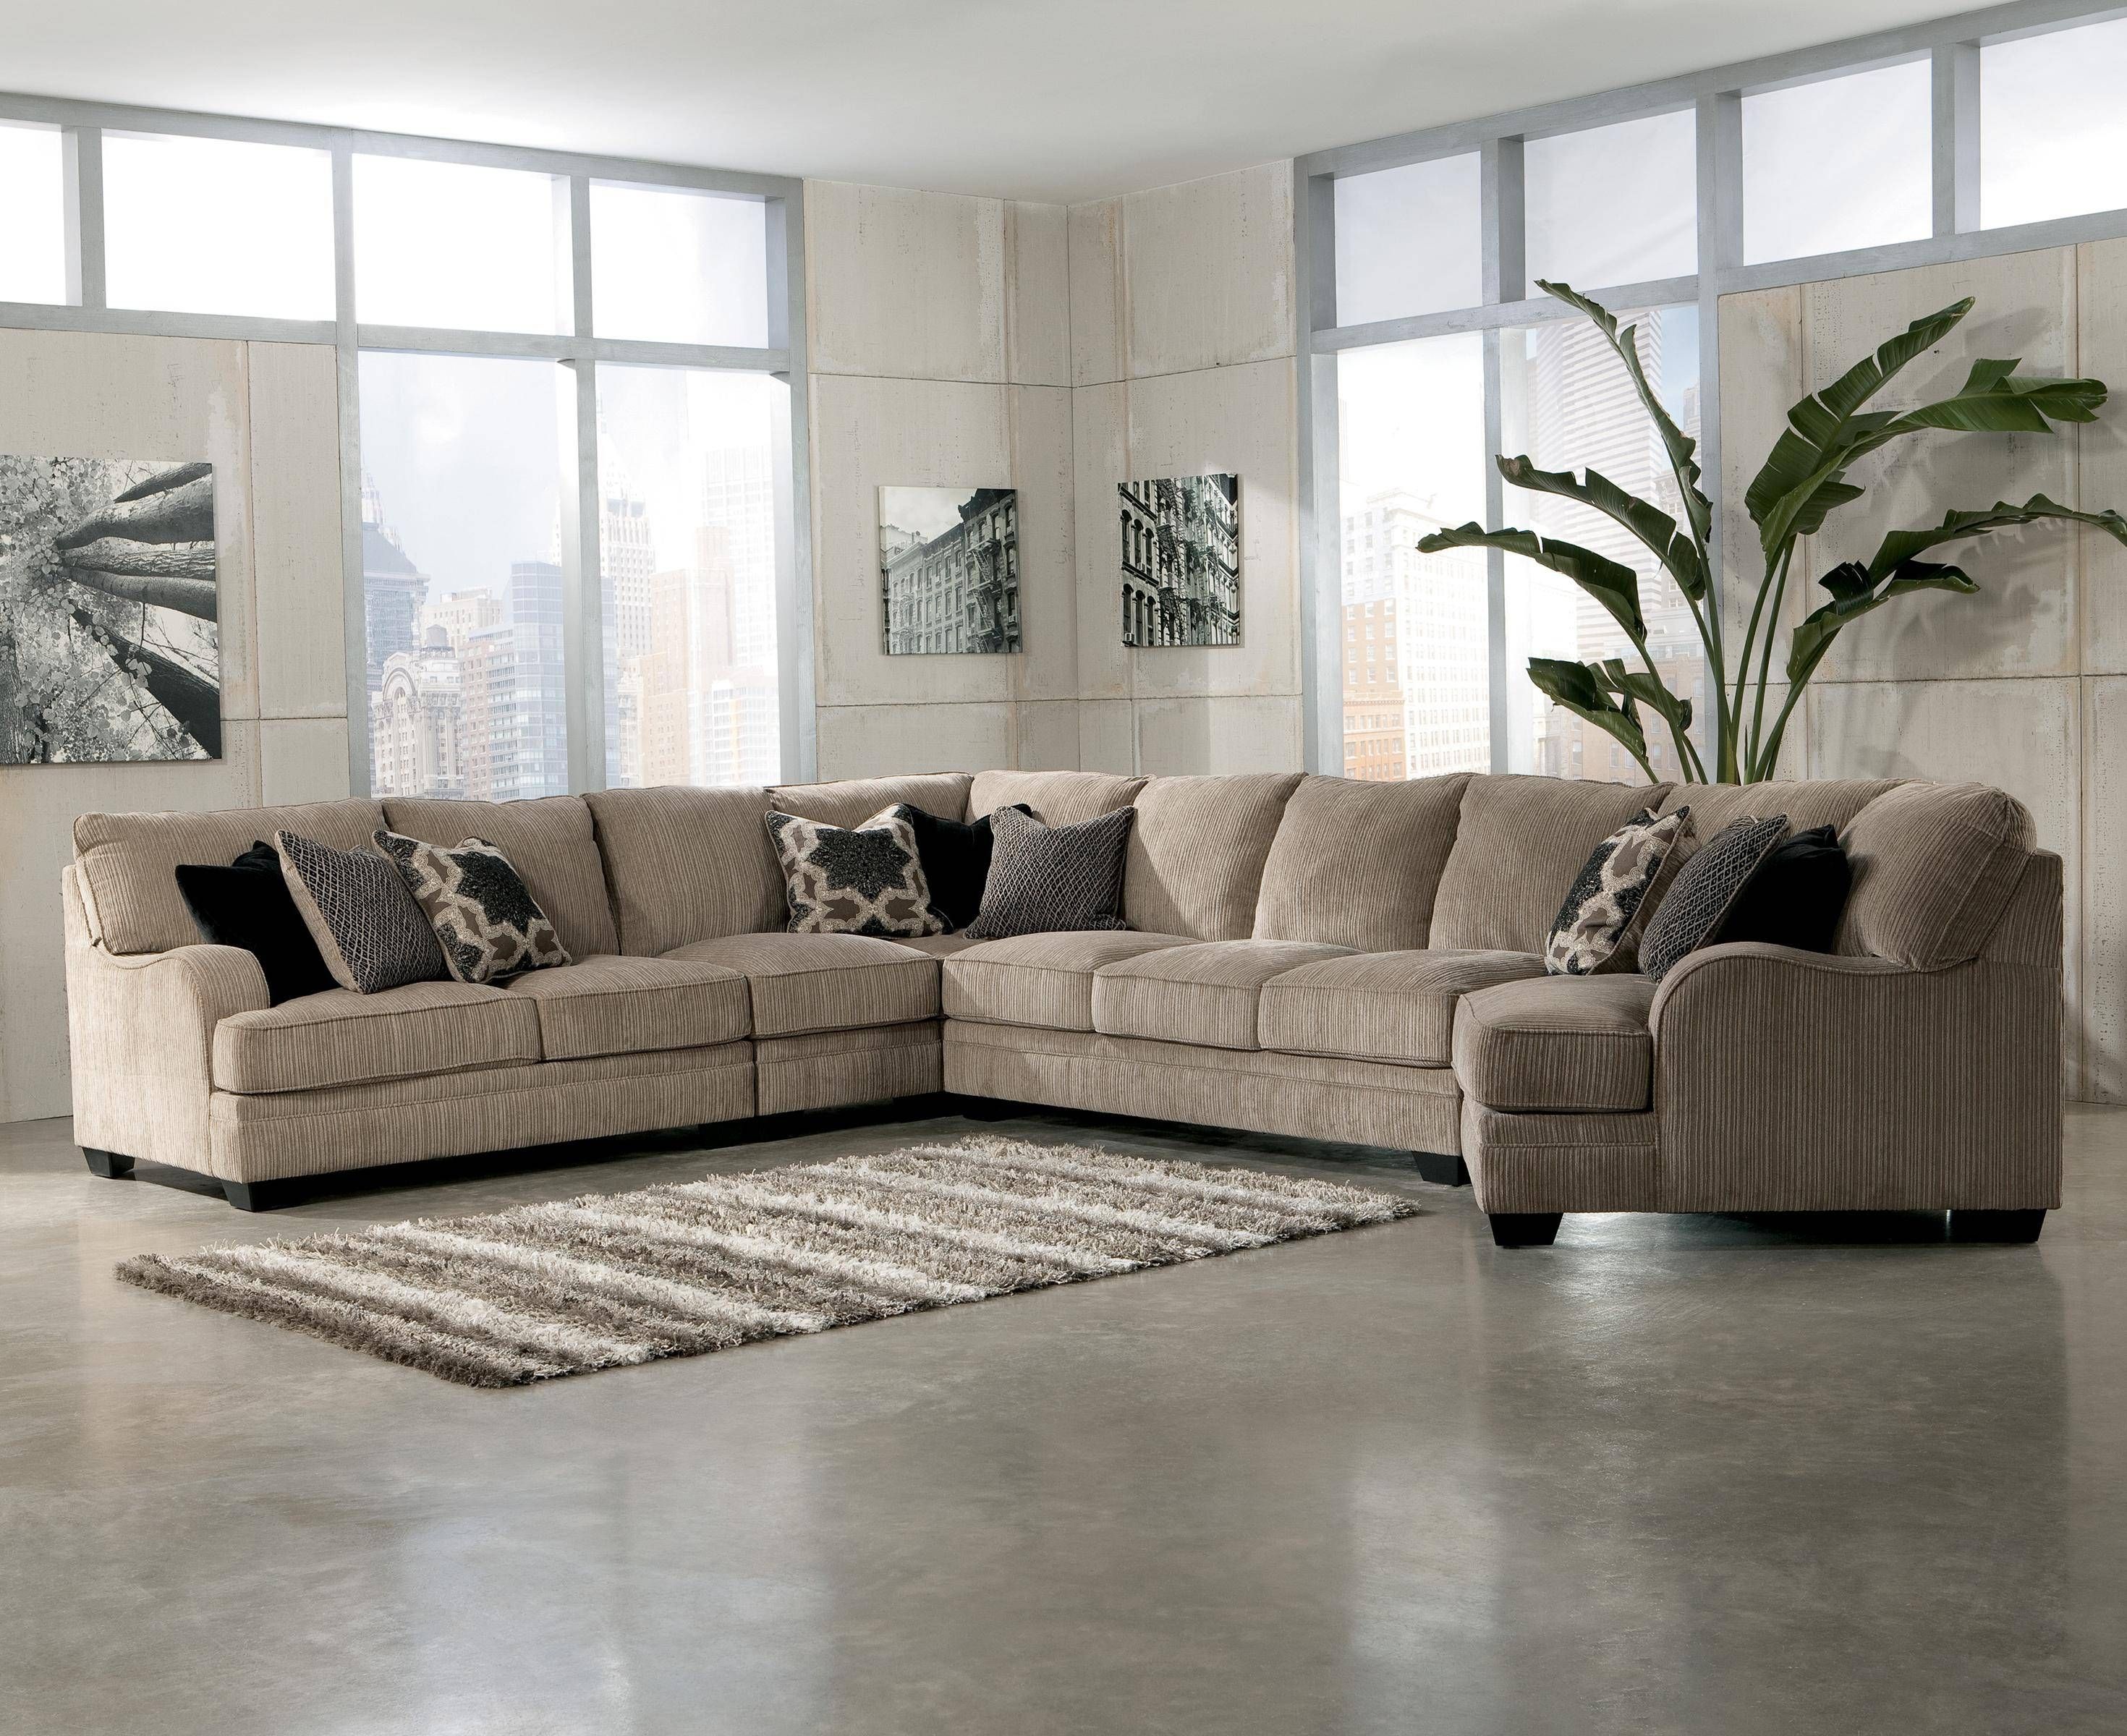 Signature Designashley Katisha – Platinum 5 Piece Sectional Intended For Cuddler Sectional Sofa (View 14 of 30)